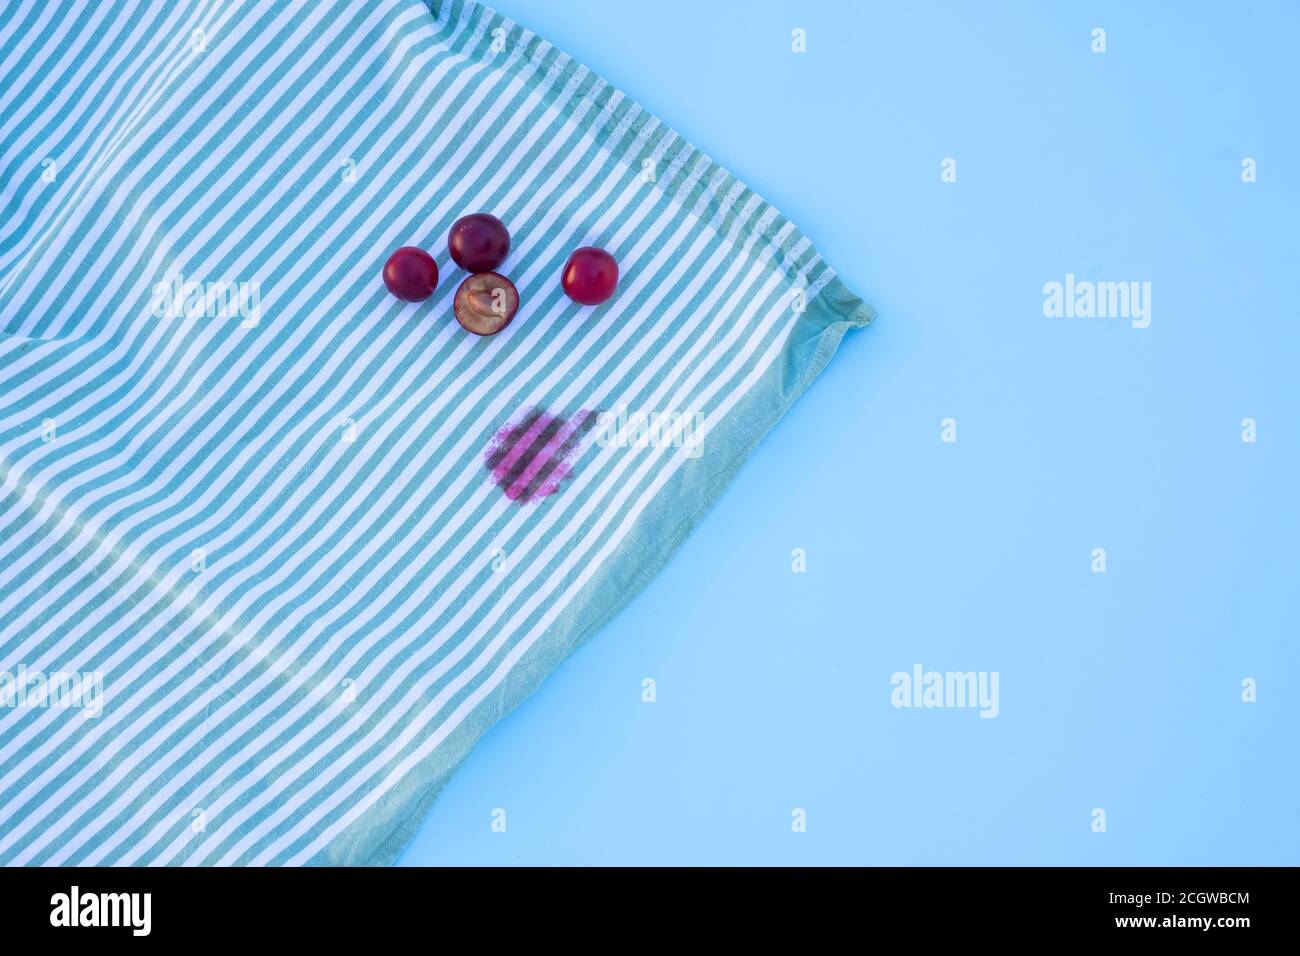 dirty stains on the tablecloth. isolated on blue table.top view Stock Photo